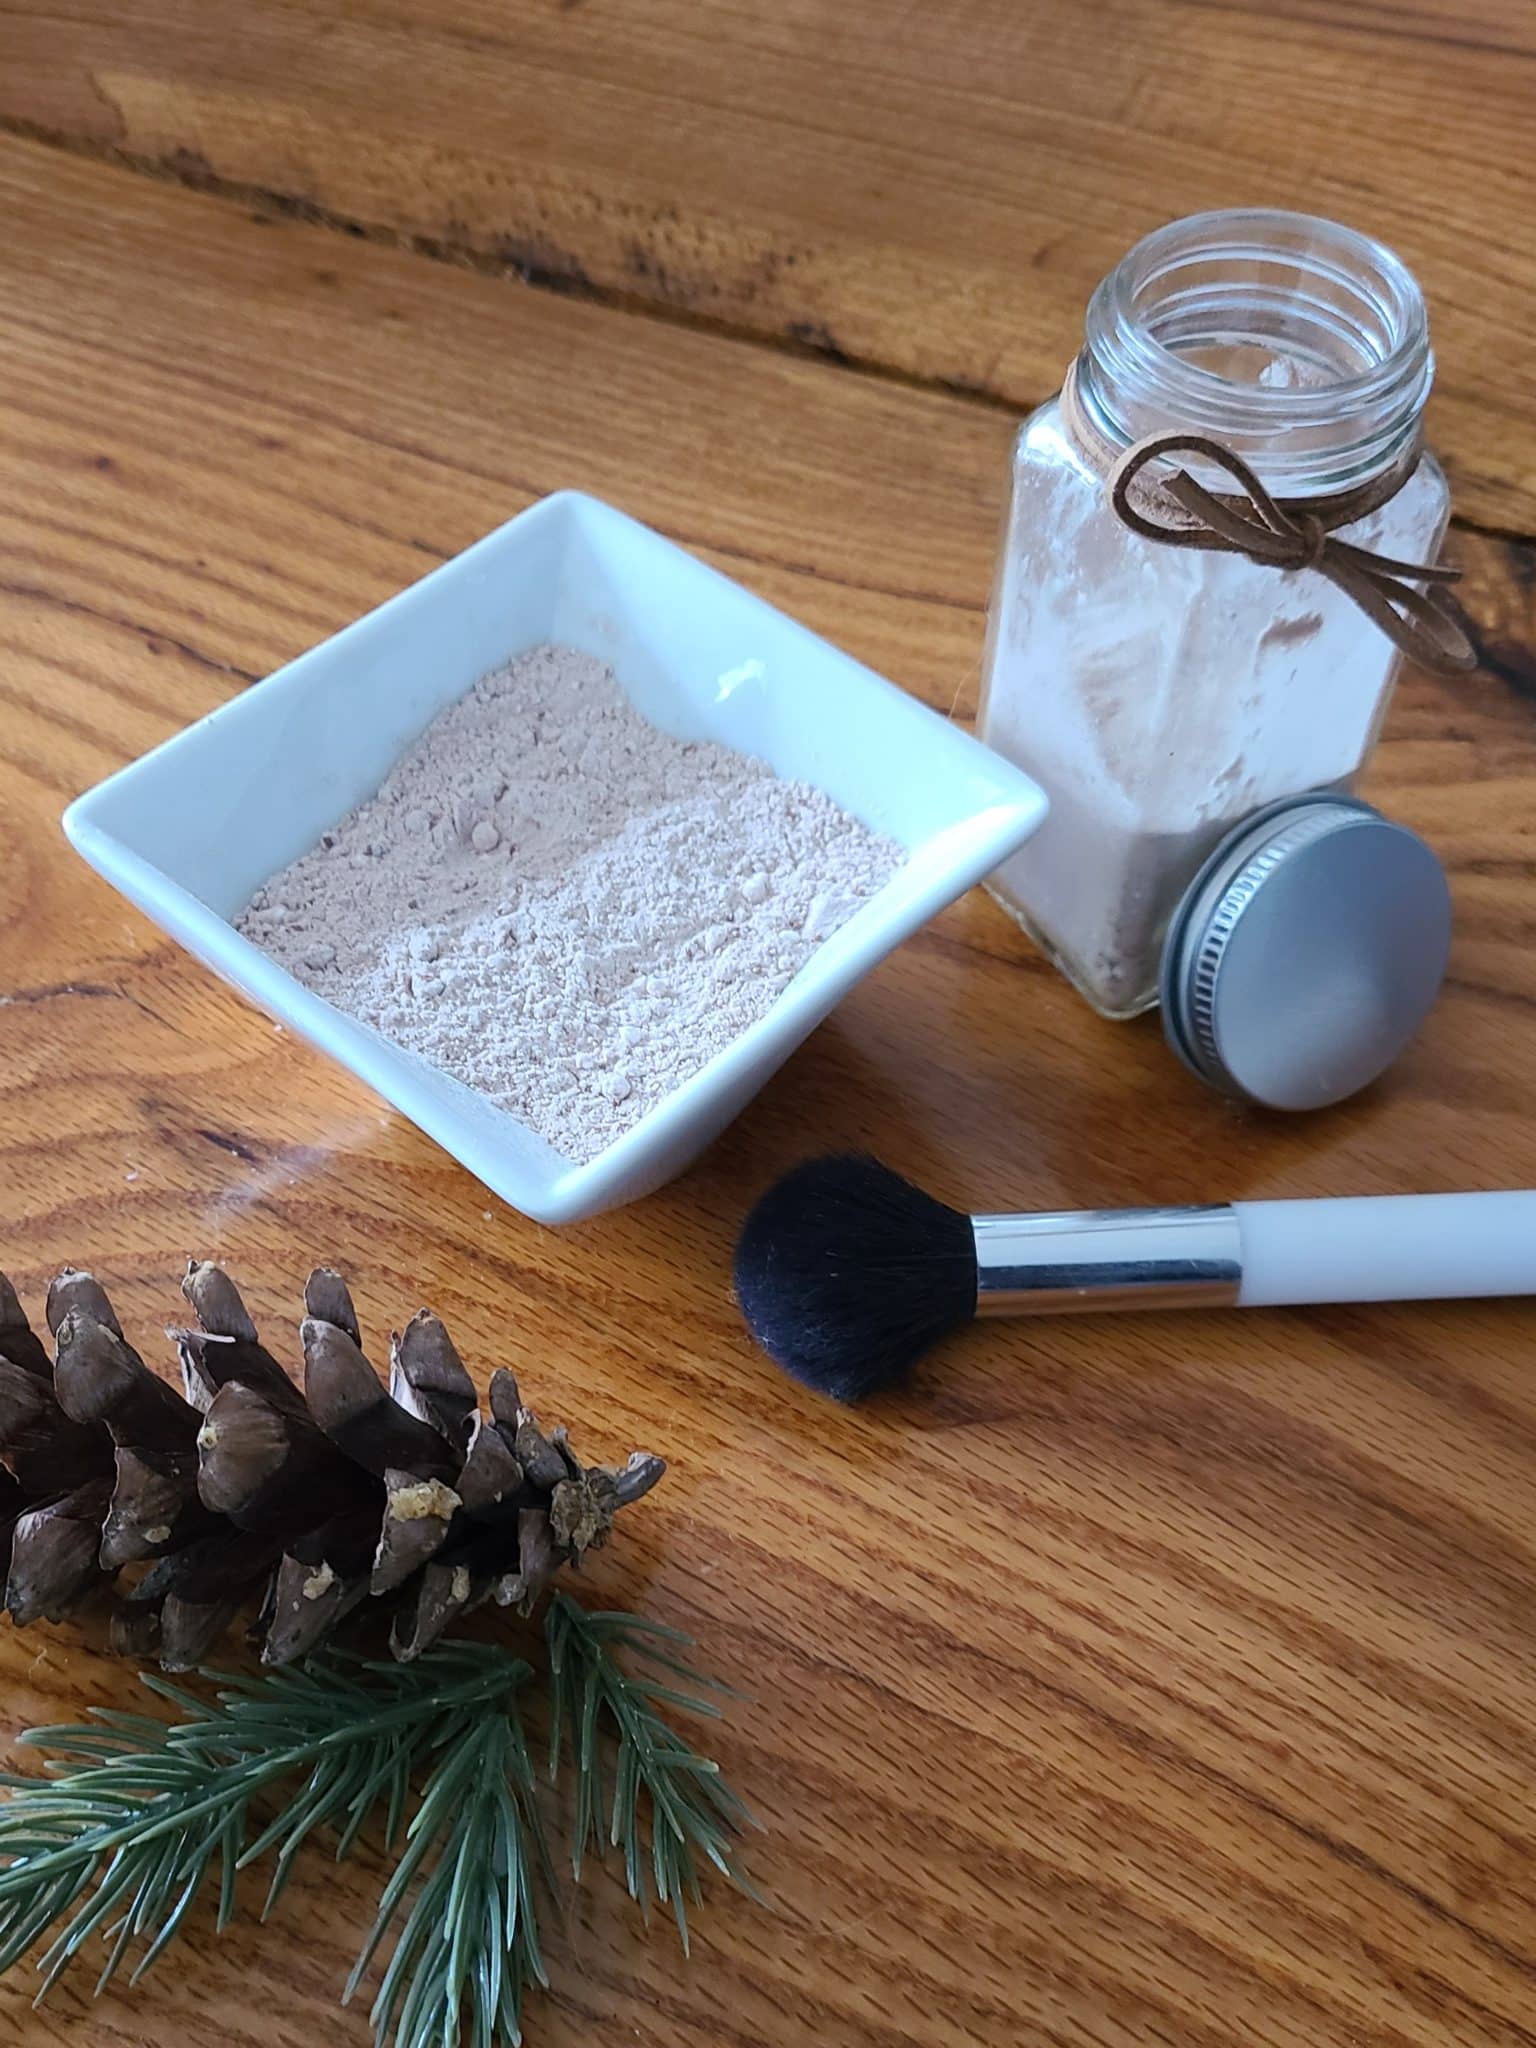 Last minute gifts for mom for Christmas - DIY Dry Shampoo